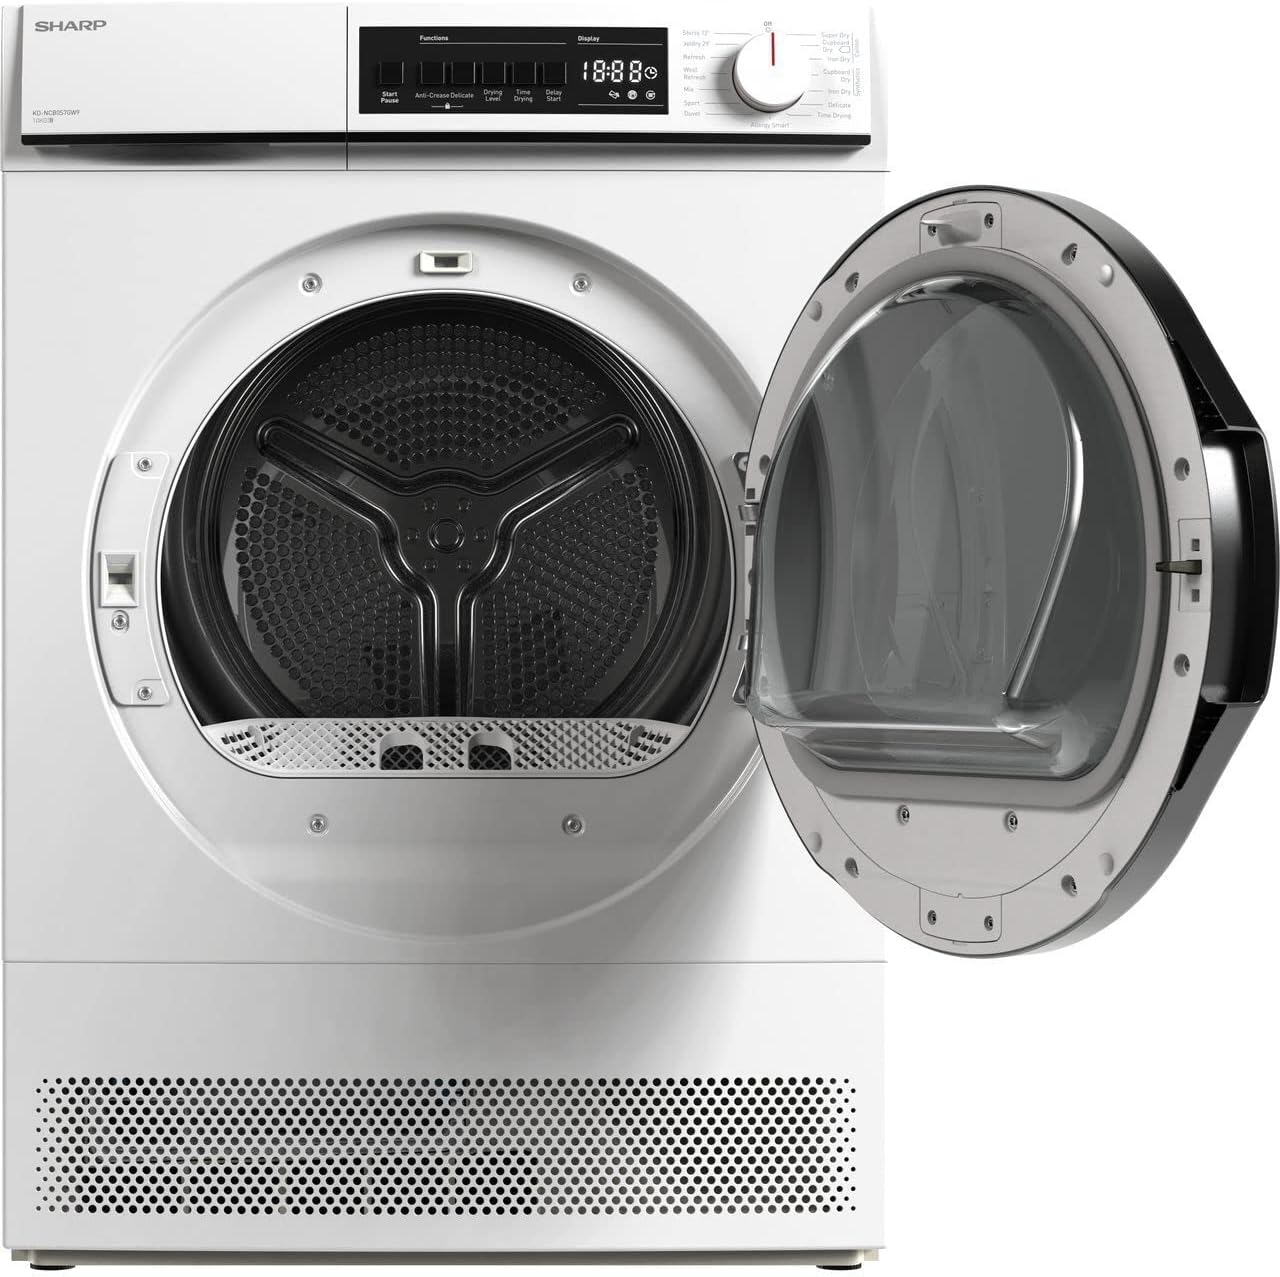 Sharp KD - NCB0S7GW9 10Kg Condenser Tumble Dryer - White - B Rated - Amazing Gadgets Outlet